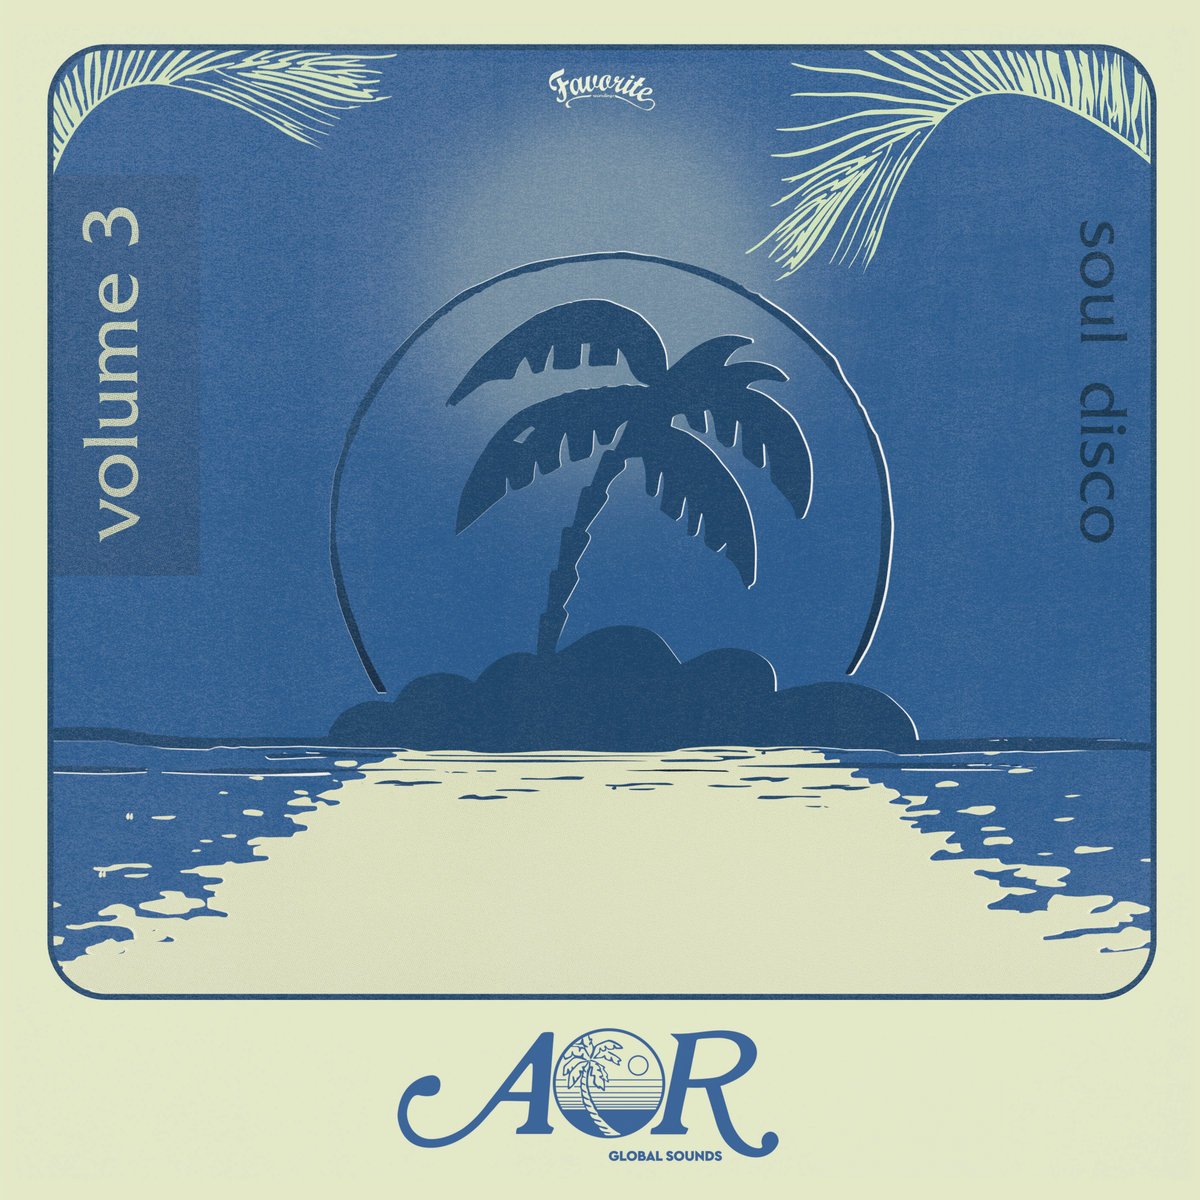 The 'AOR Global Sounds' series from @favorite_rec has all the makings of a future classic Gatefold 2xLP 🔊 bit.ly/2obpijv 🔊